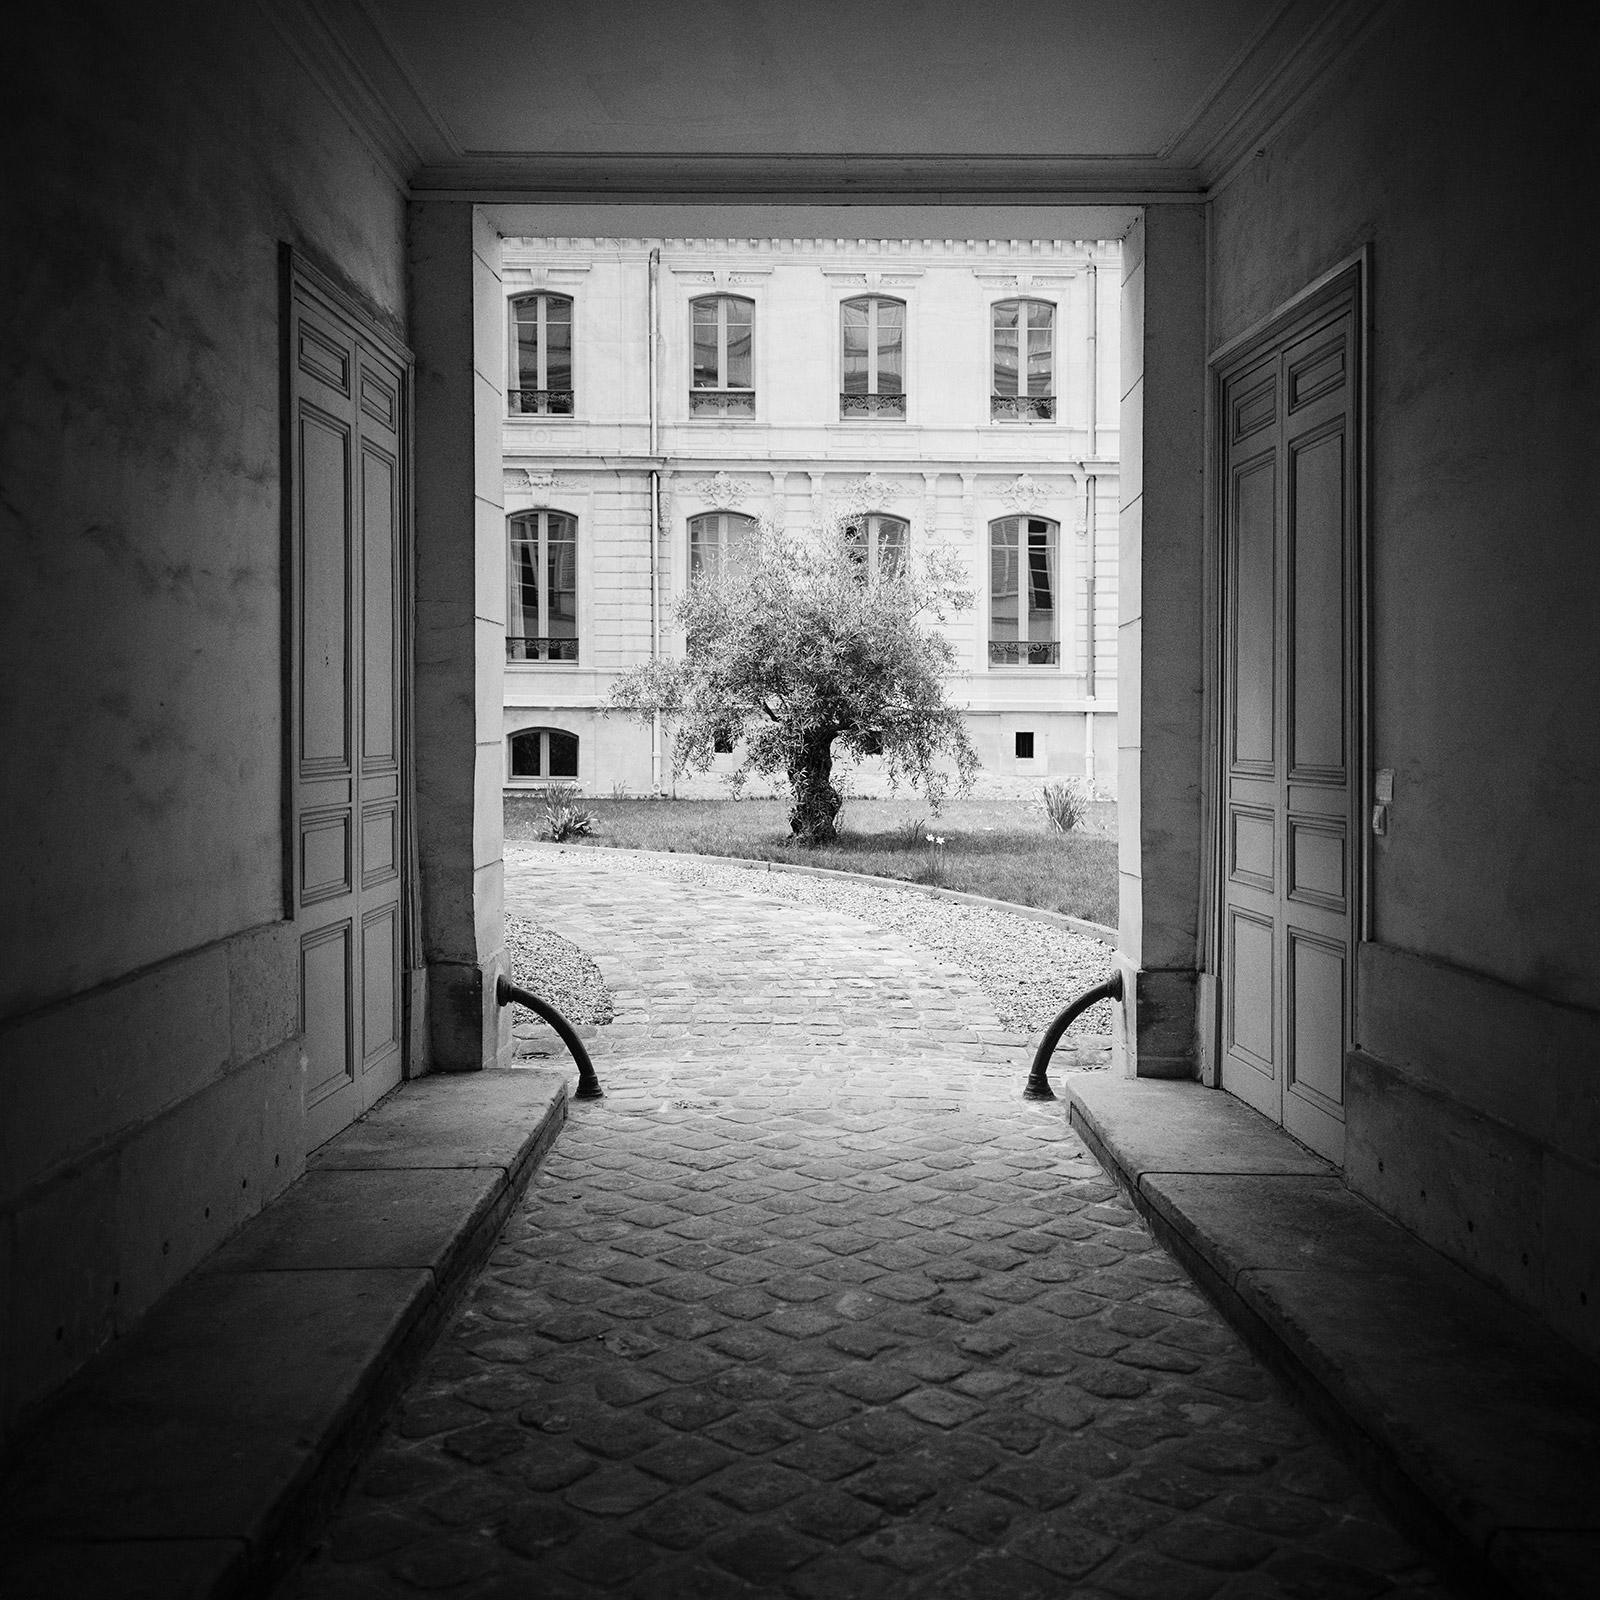 Gerald Berghammer, Ina Forstinger Black and White Photograph - Tree in the Courtyard, Paris, France, black and white photography, landscape